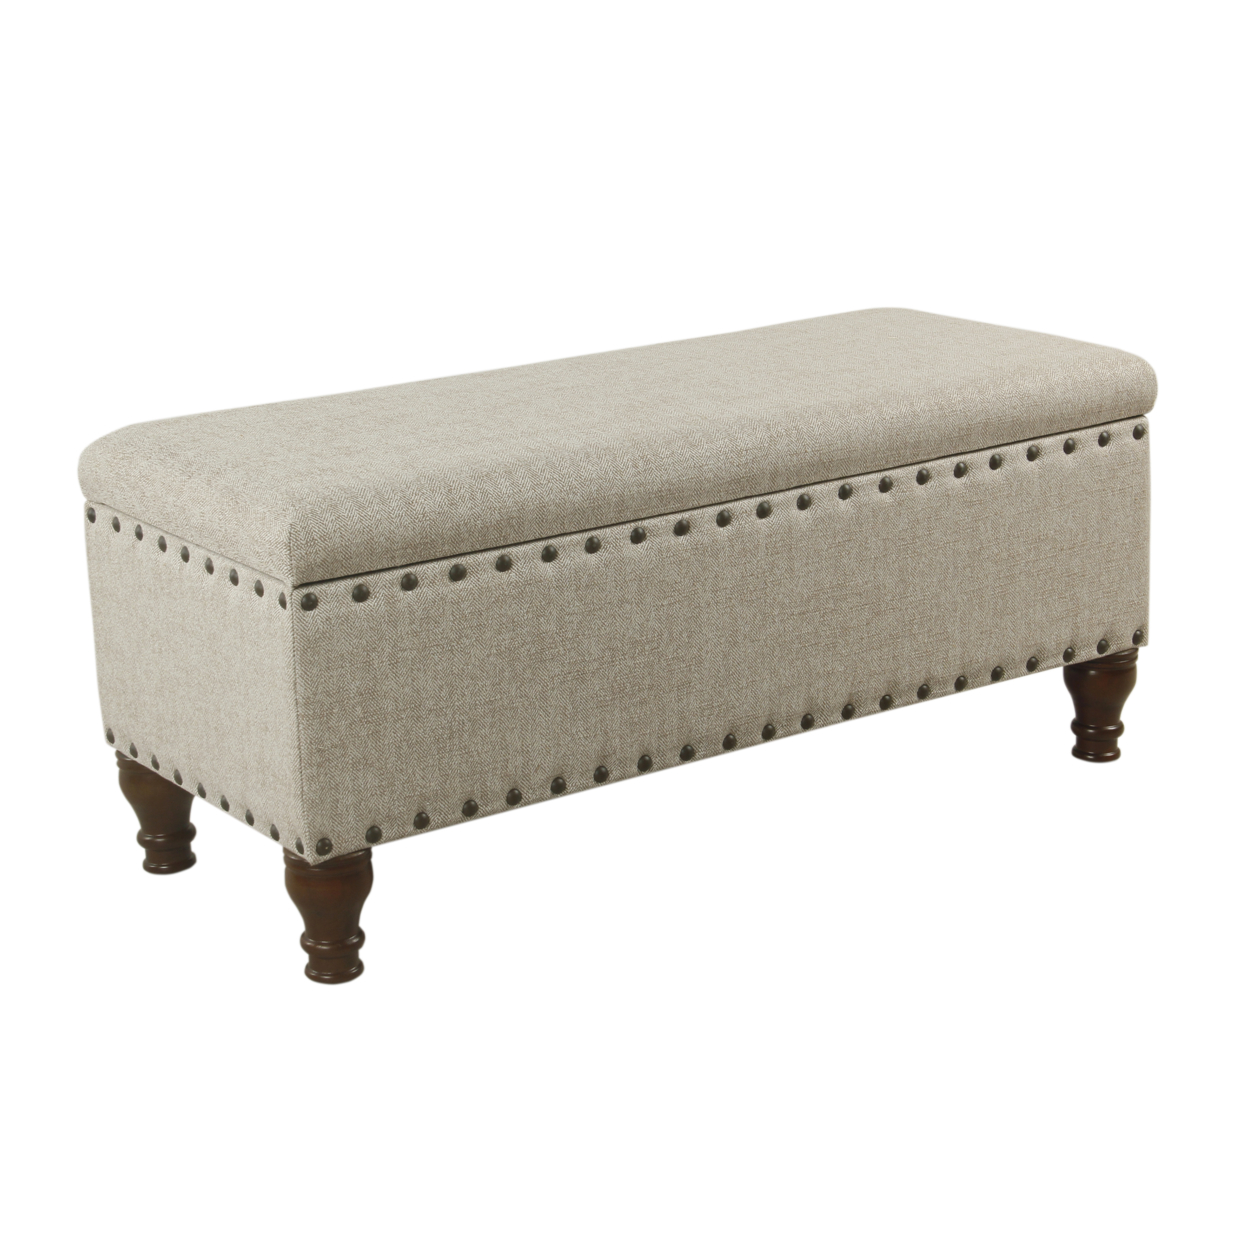 Textured Fabric Upholstered Wooden Storage Bench With Nail Head Trim, Large, Beige And Brown- Saltoro Sherpi